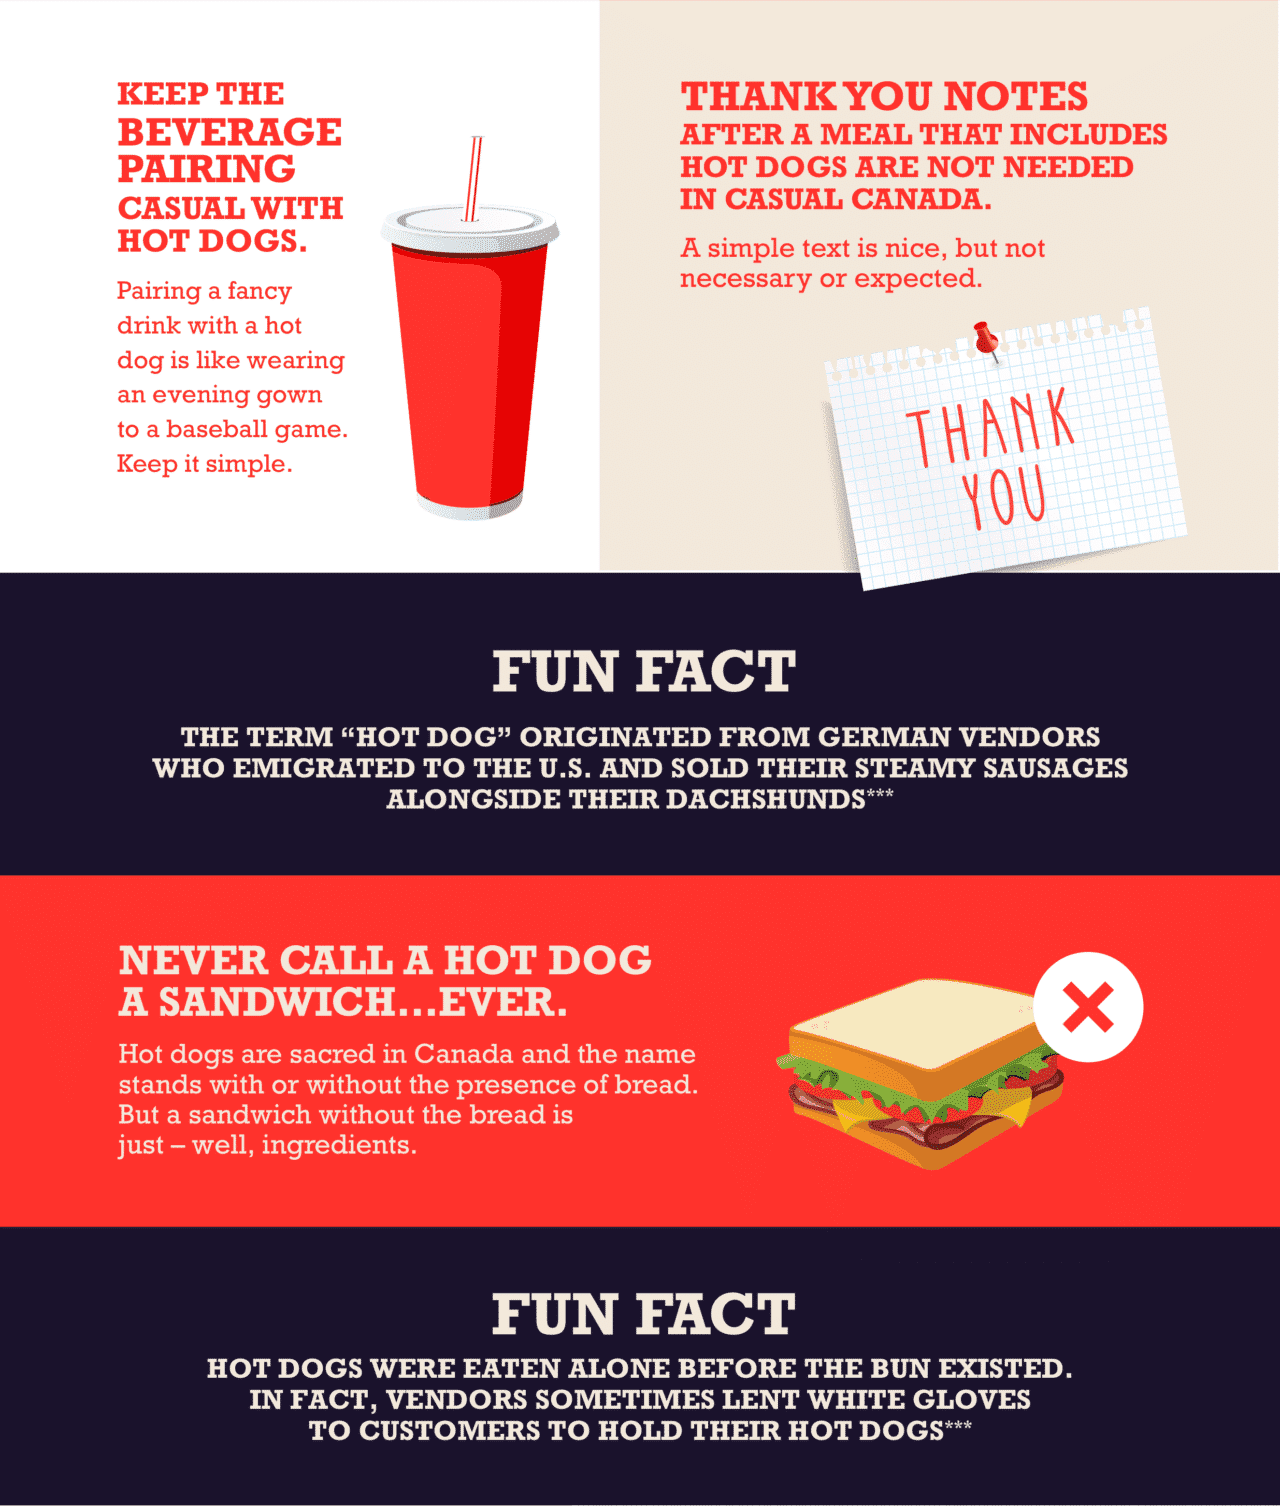 Hot dog etiquette fun facts and beverage pairing